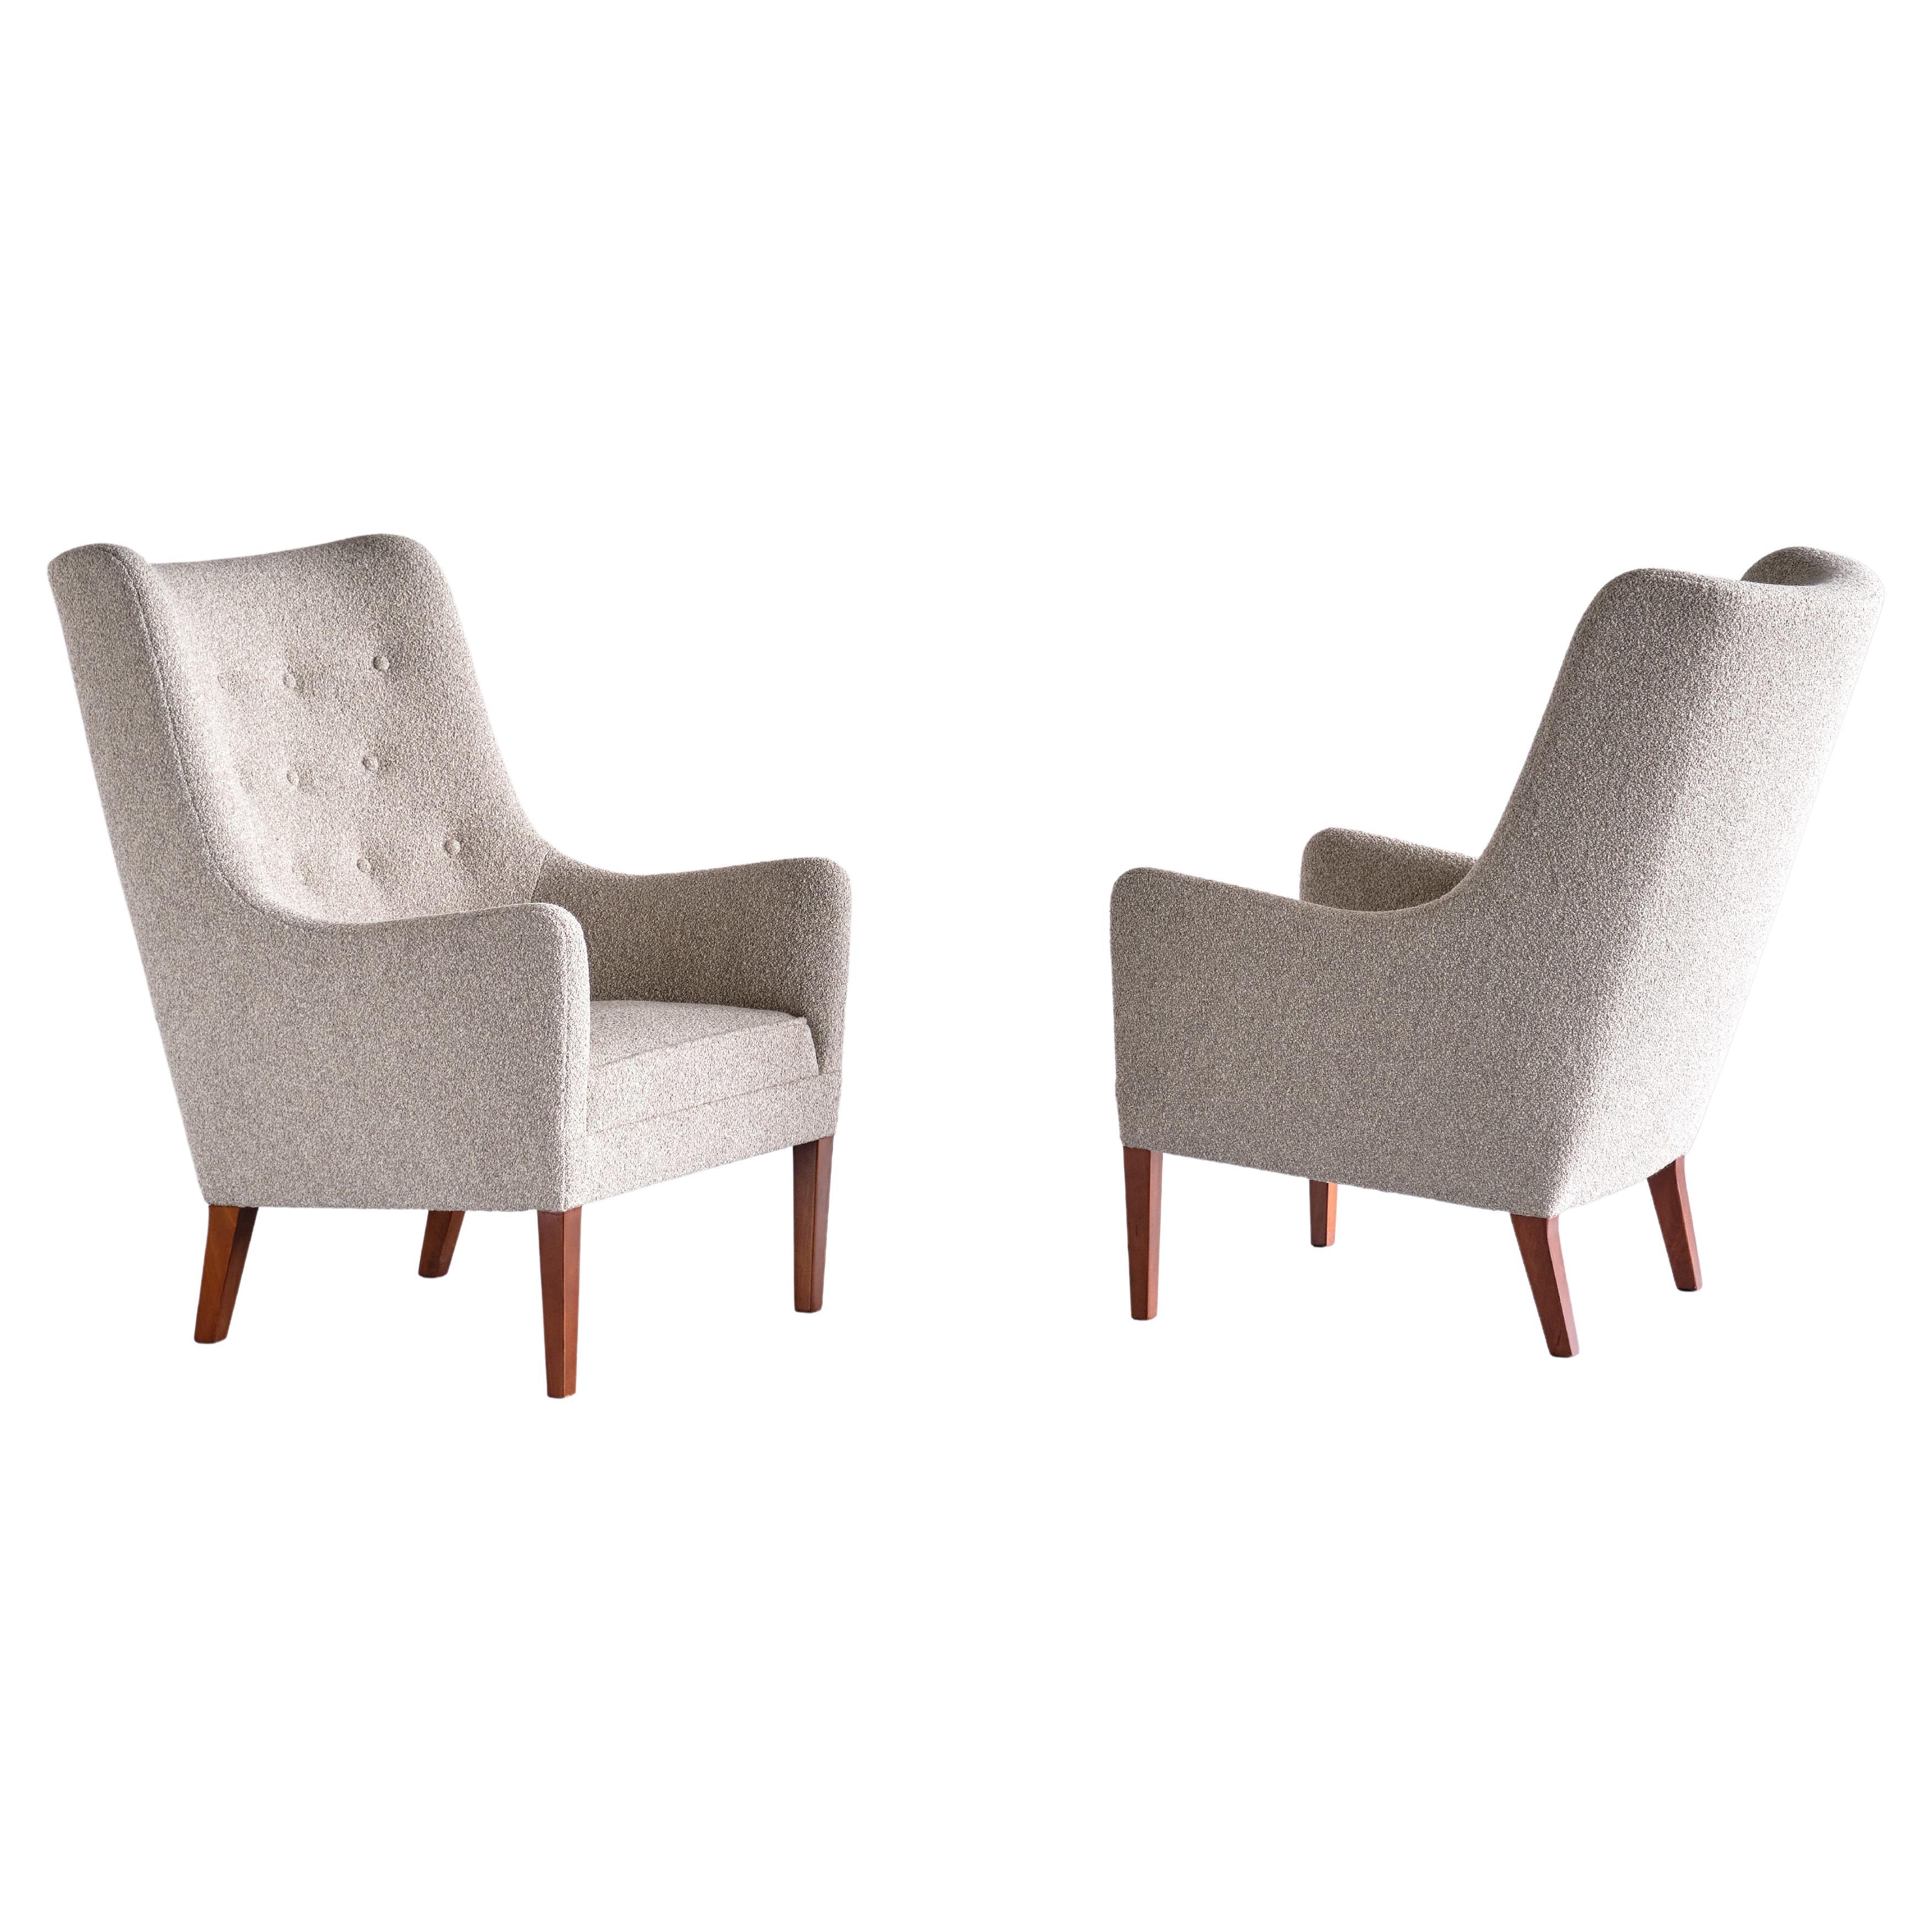 This very rare pair of armchairs was designed and produced by Jacob Kjær in Denmark in the late 1940s. The sumptuous design is marked by the distinct combination of curved and straight lines of the seat. The high back with the buttoned backrest and